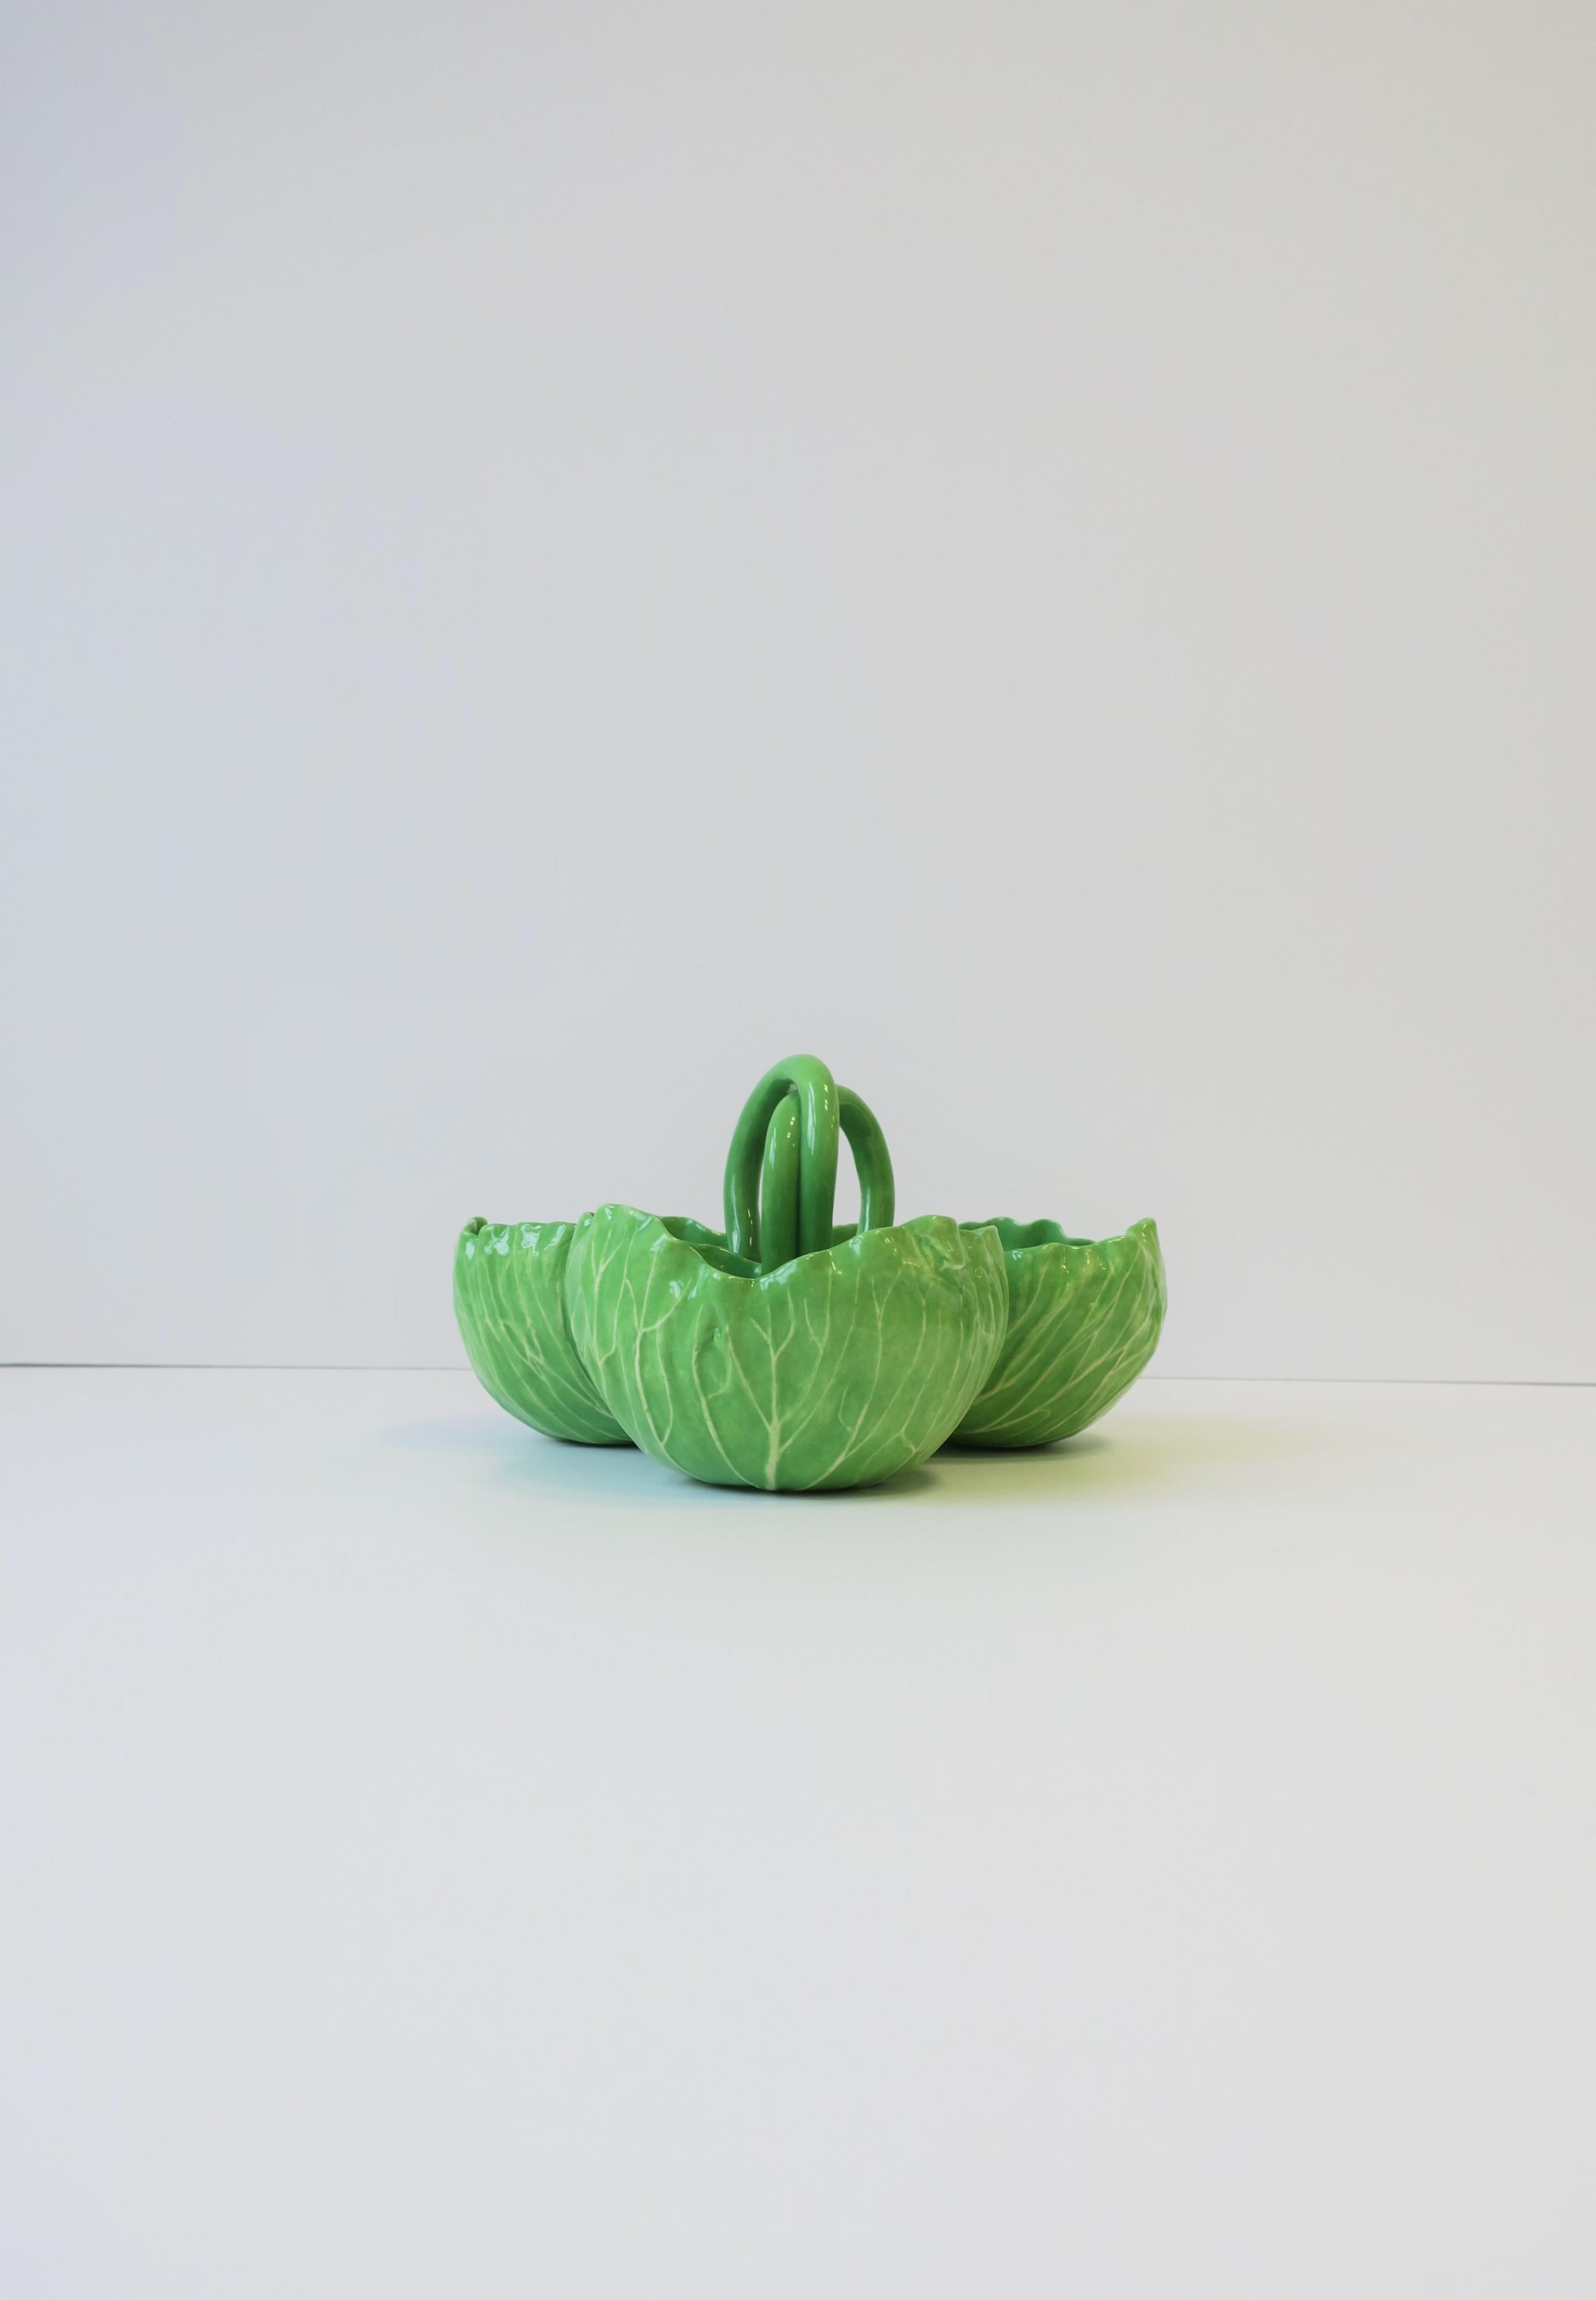 A beautiful and rare signed Majolica style 'Lettuceware' pottery serving dish by Designer Dodie Thayer, circa 20th century. Piece is comprised of three 'lettuce' cups or bowls with each measuring Approx. 4.5